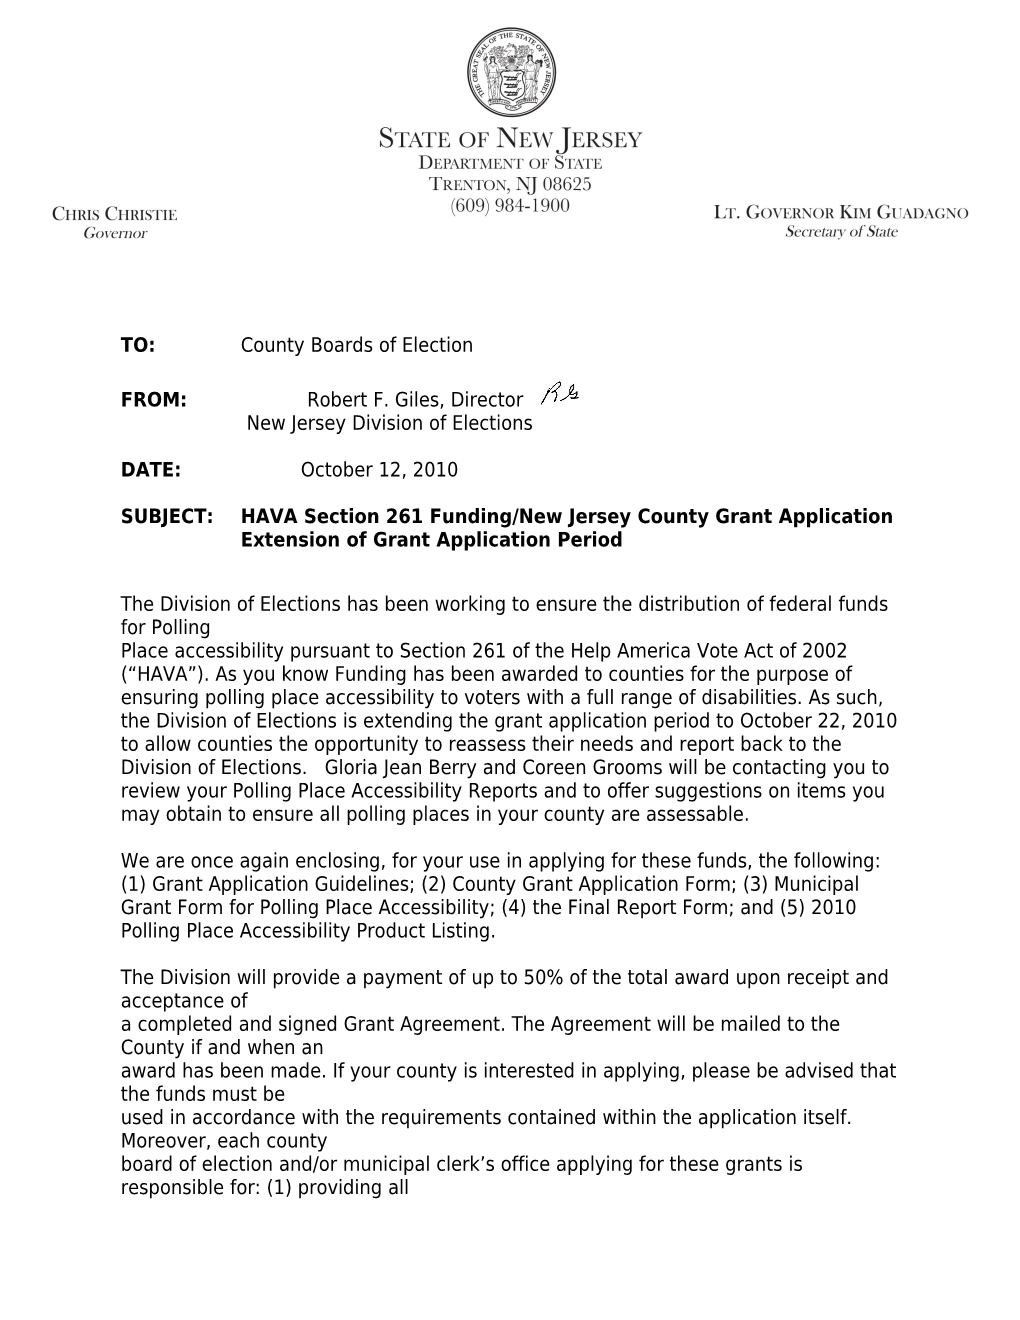 SUBJECT: HAVA Section 261 Funding/New Jersey County Grant Application